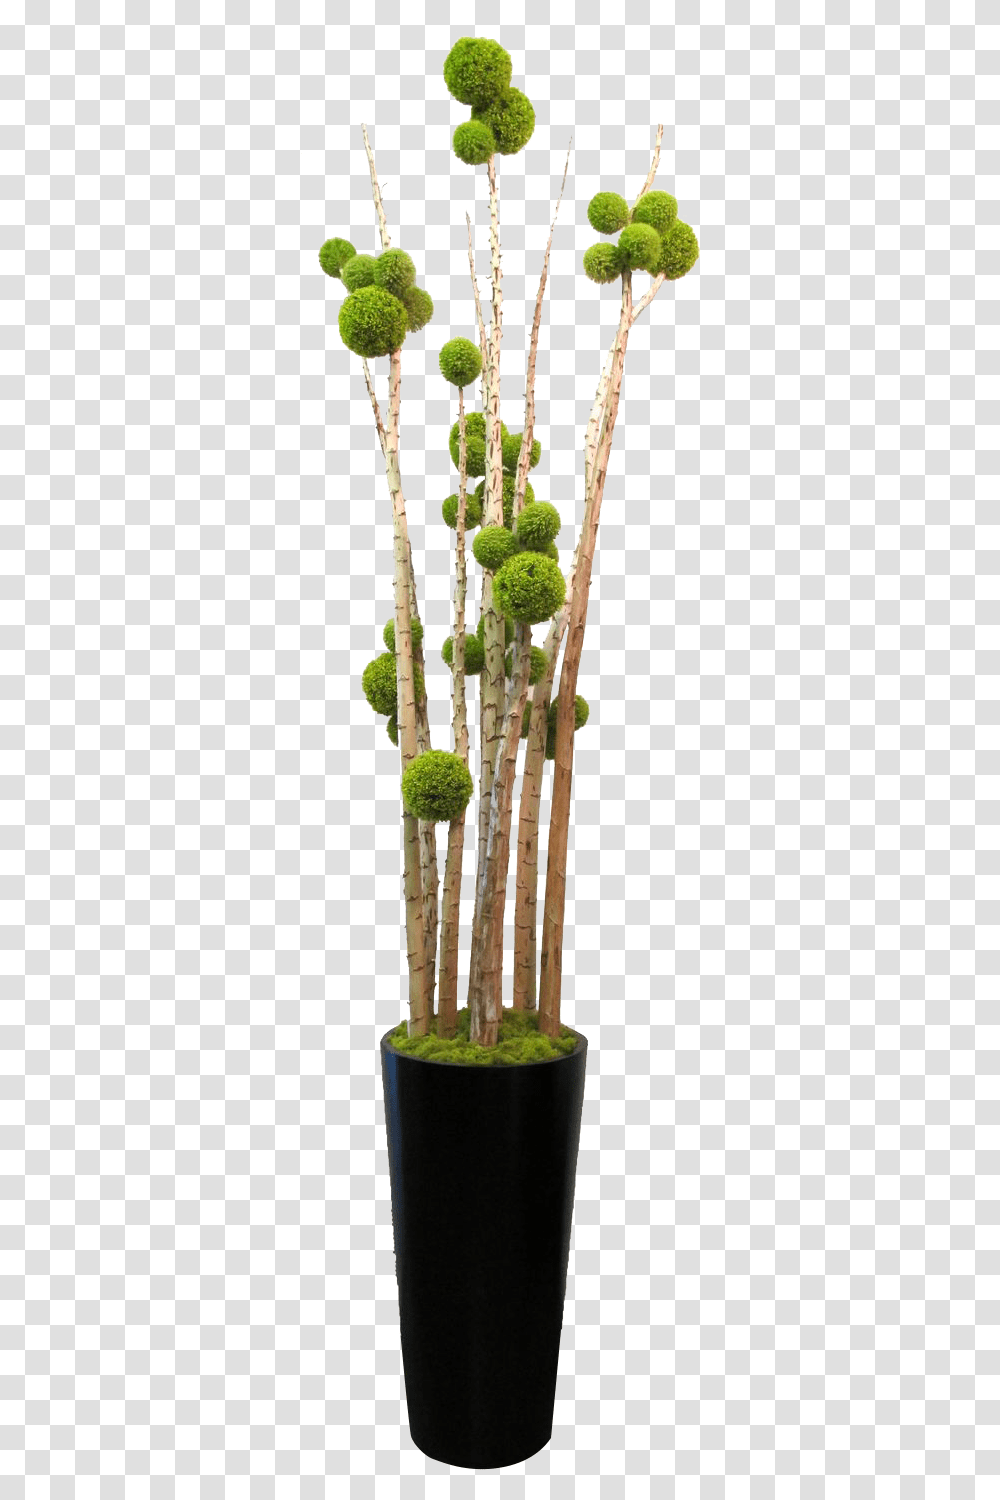 Classical Flower Vase, Plant, Stick, Cane, Bamboo Transparent Png